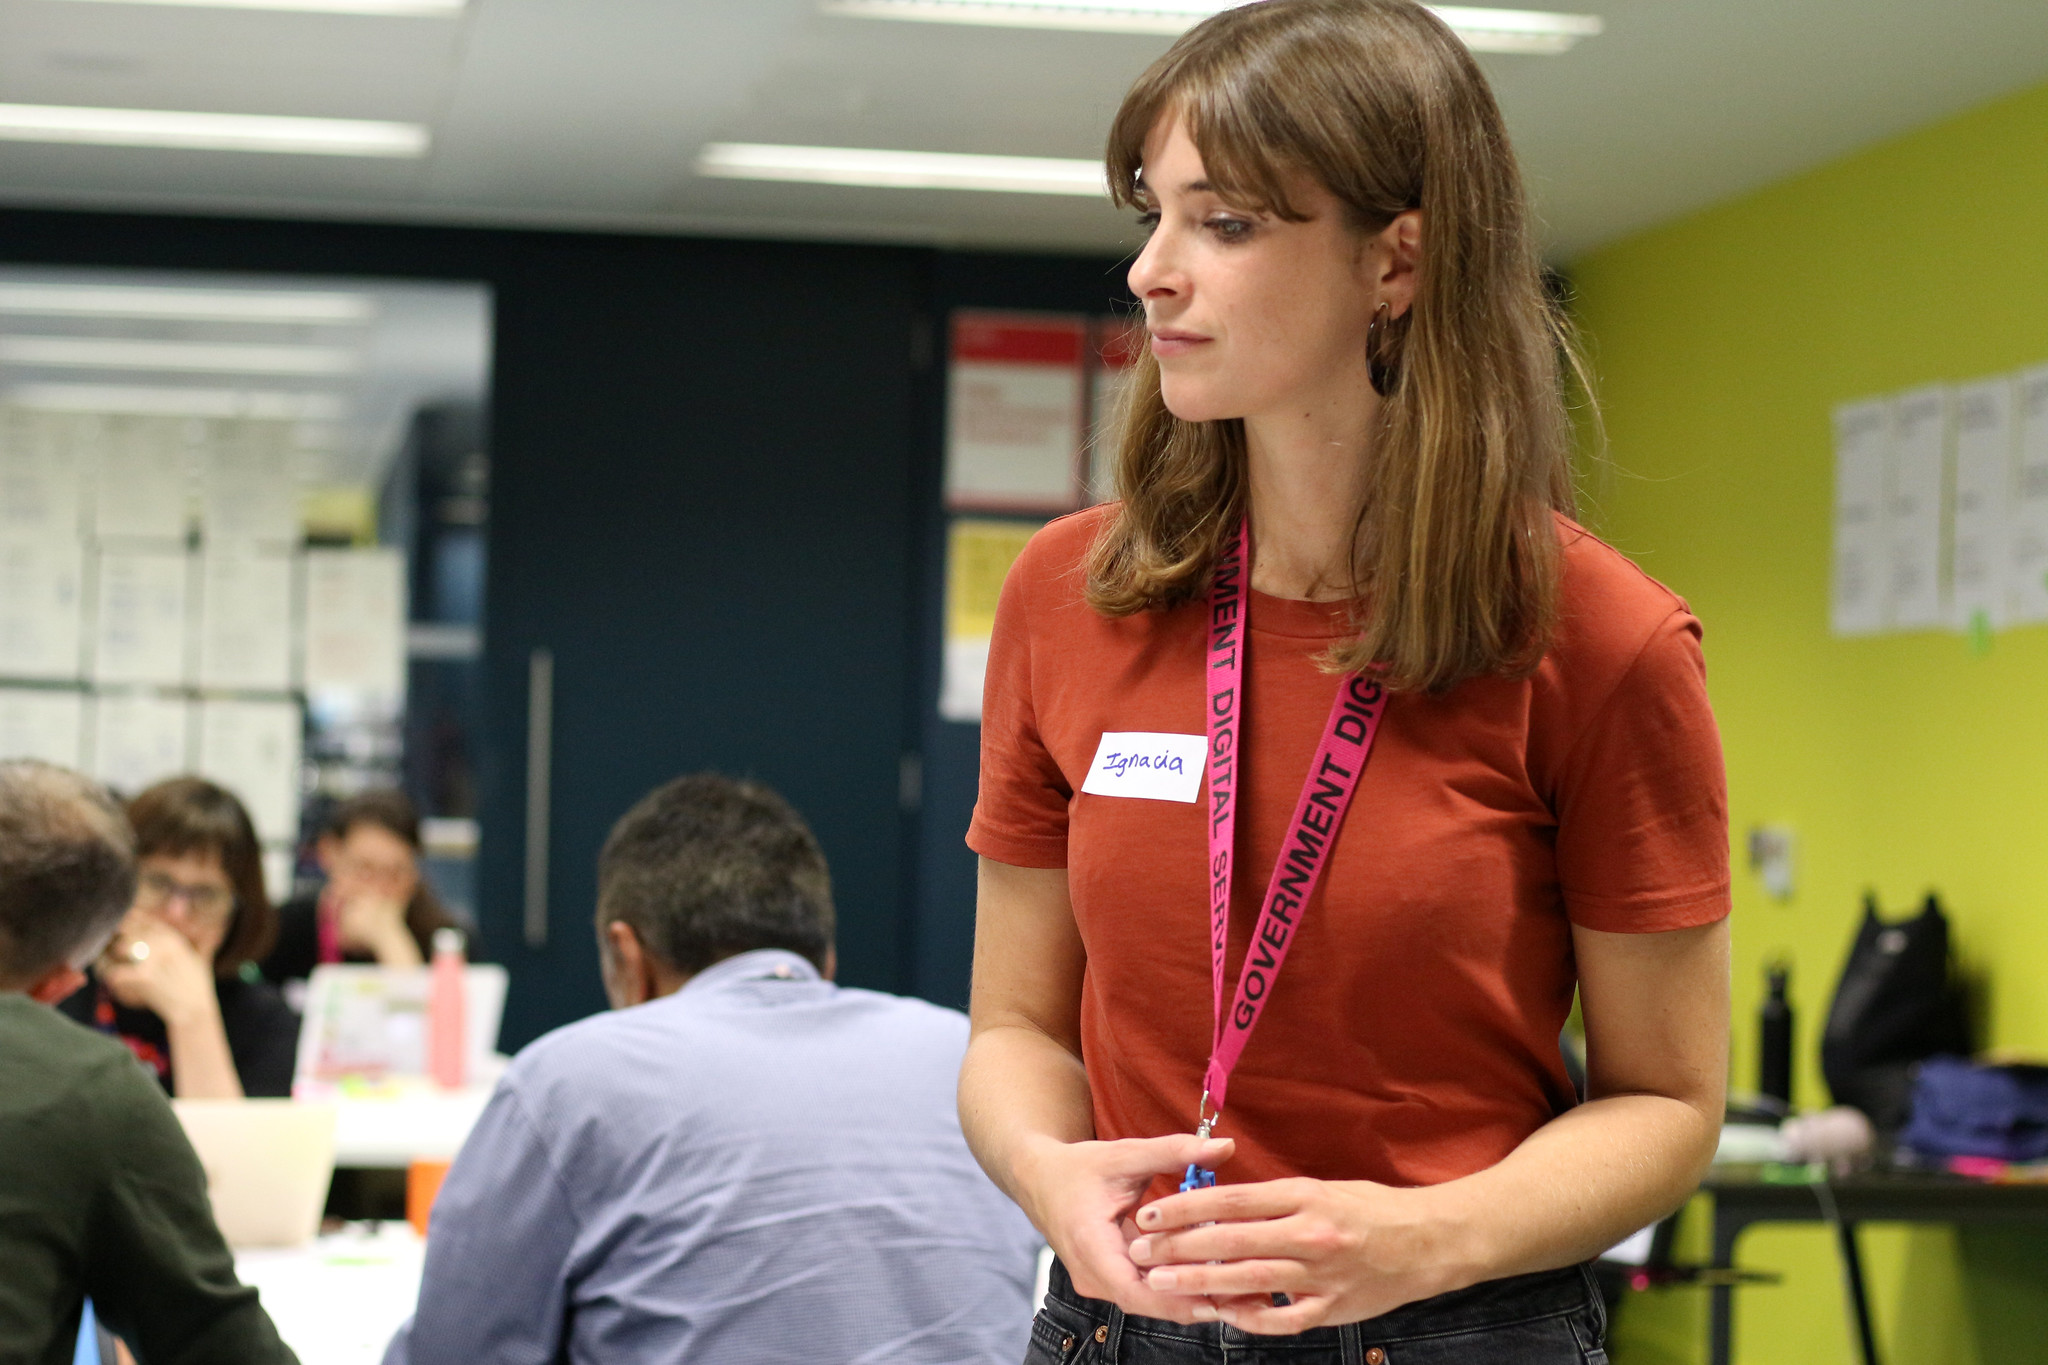 A photo of me  facilitating a workshop, wearing an orange top, a name badge that says 'Ignacia', and a magenta lanyard from the Government Digital Service